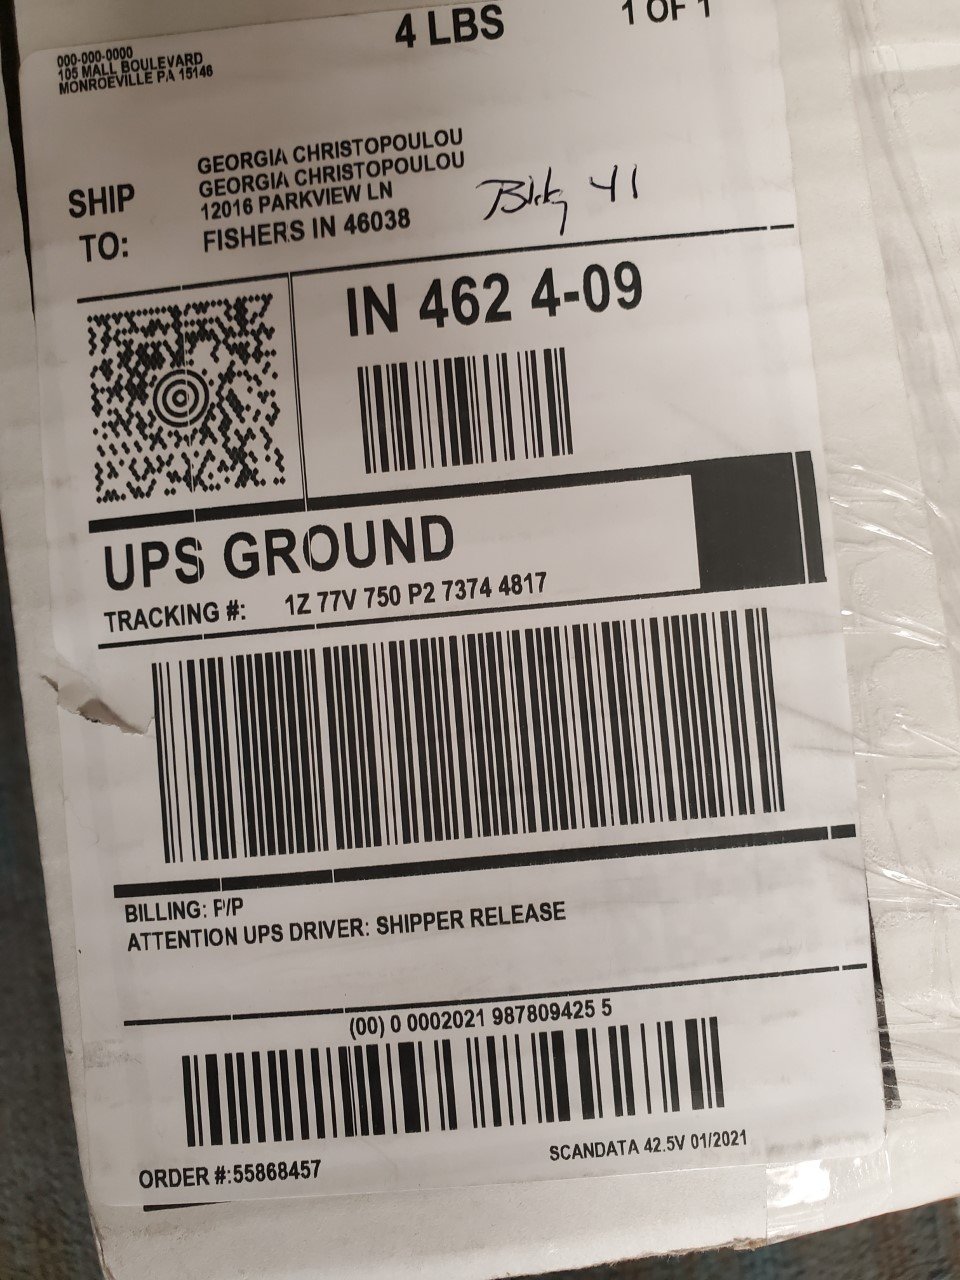 UPS complaint Delivery at wrong location